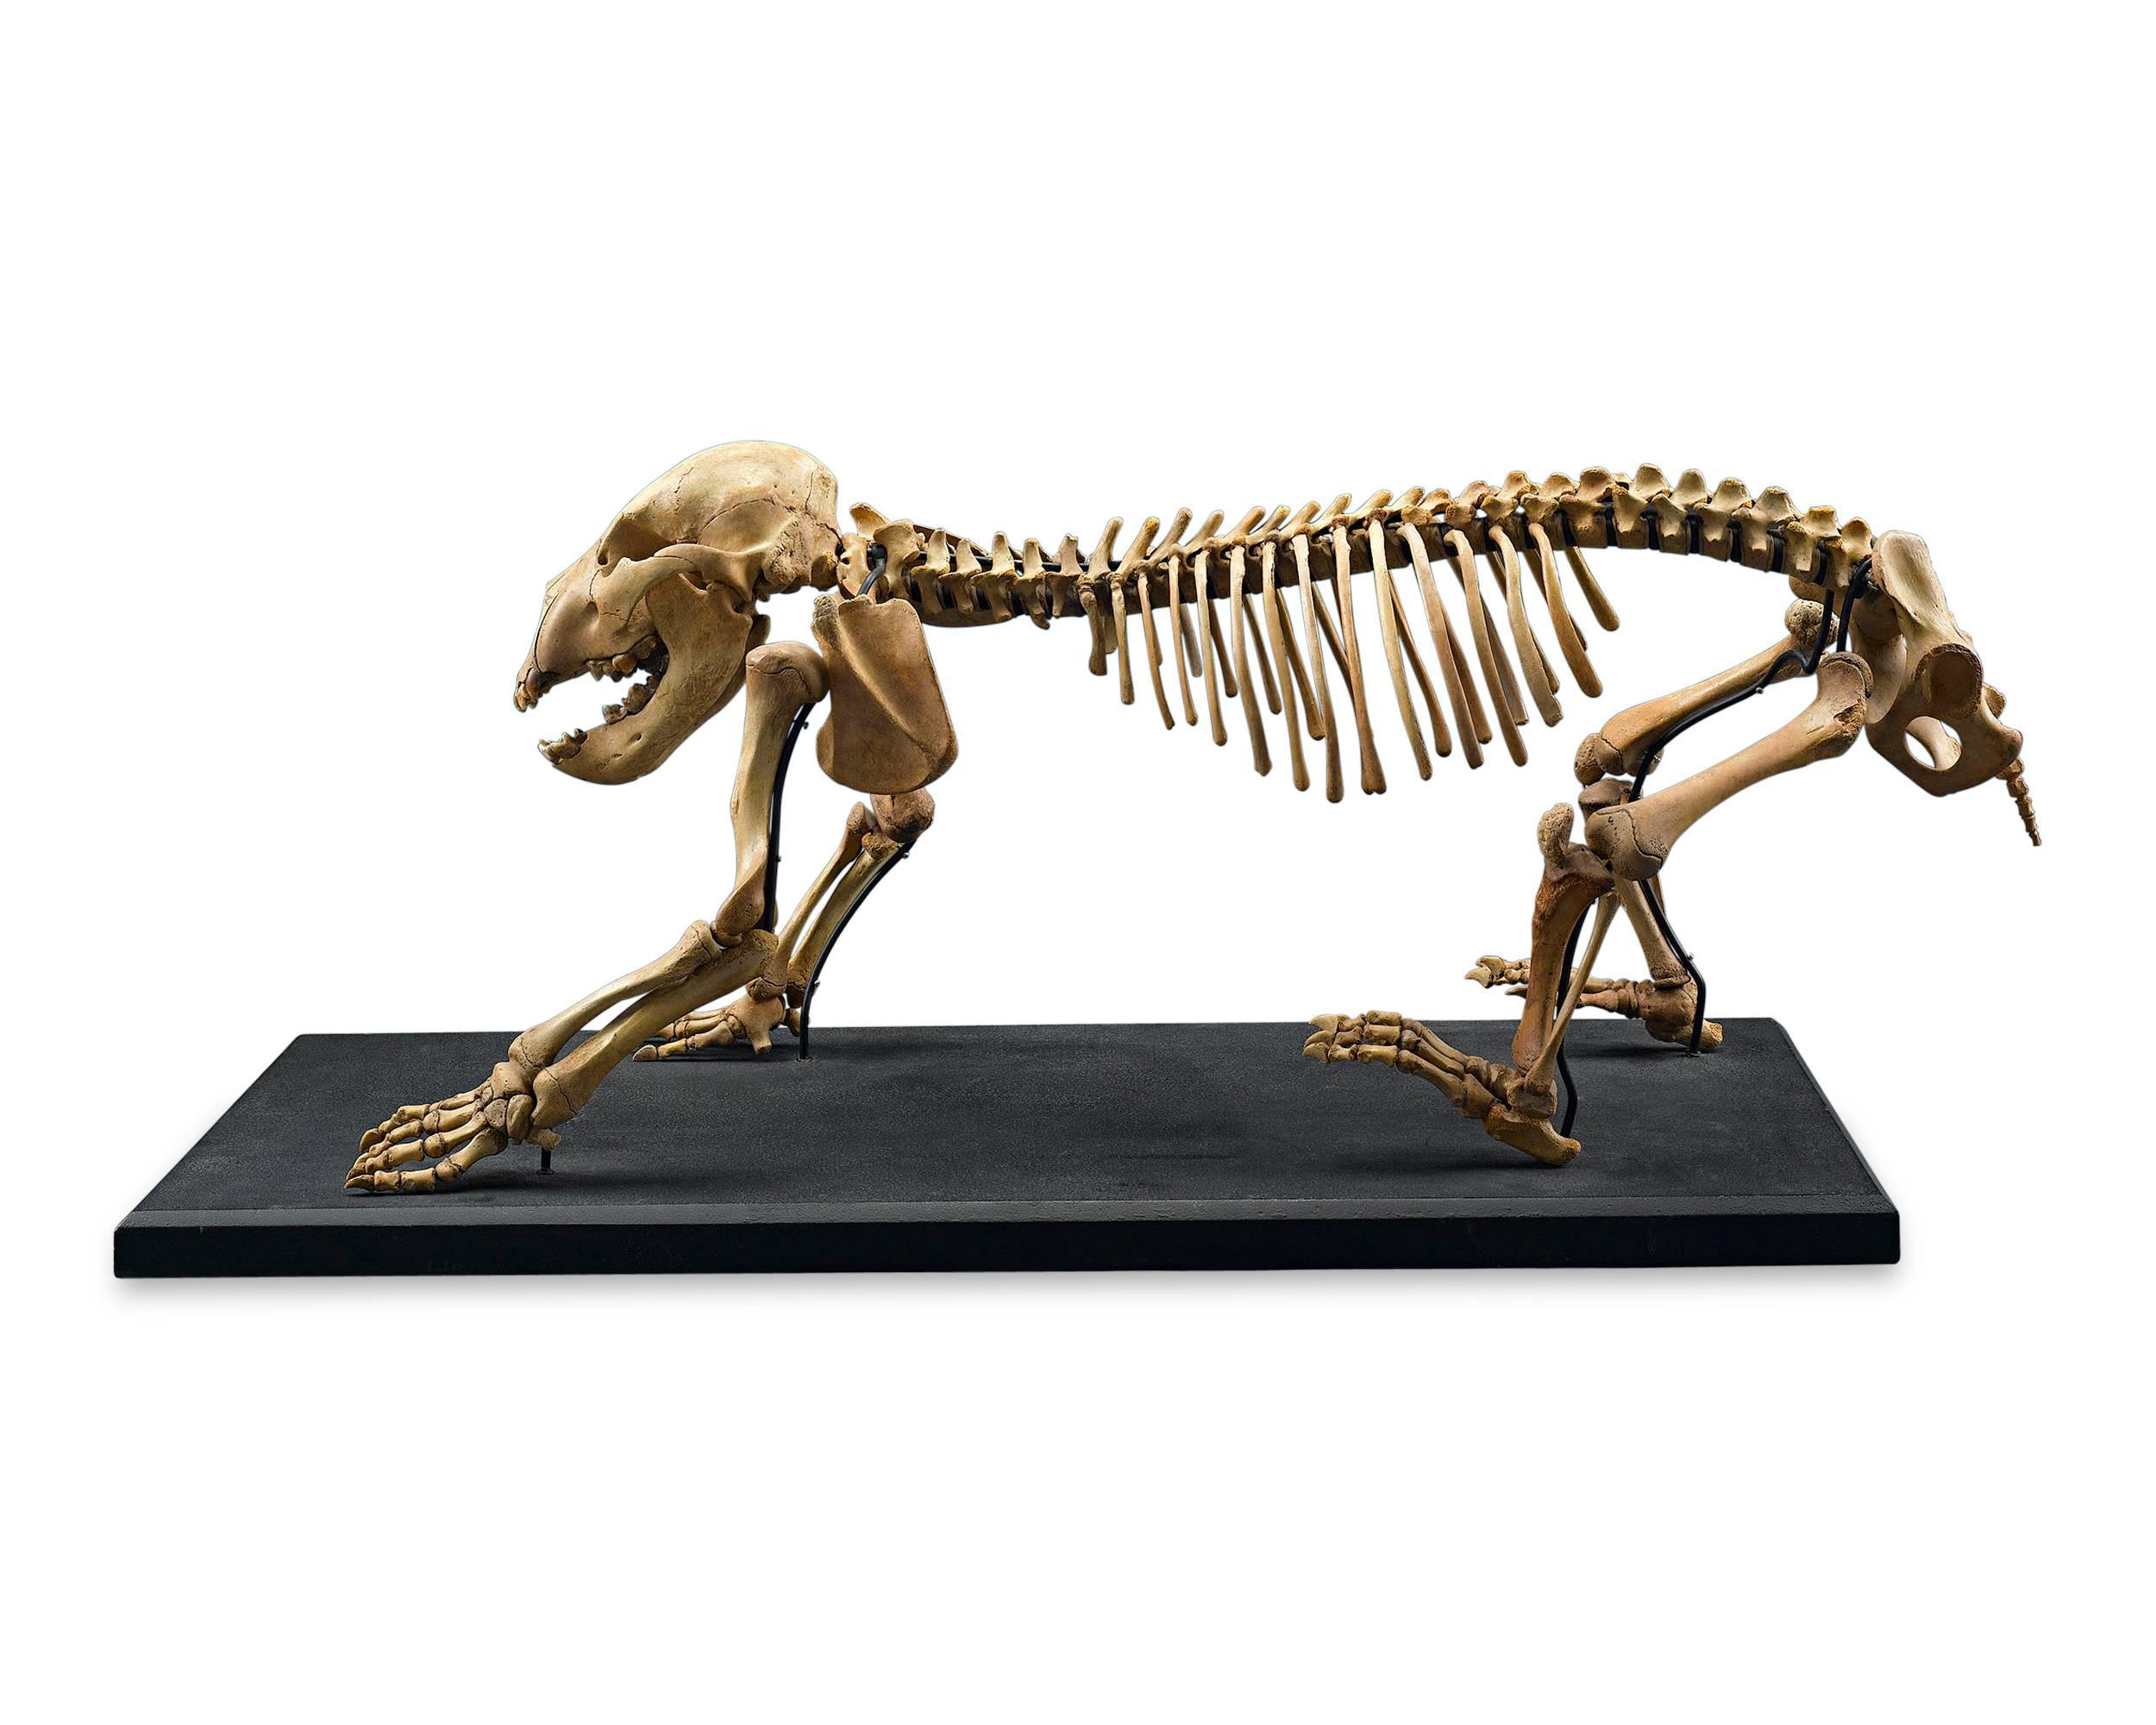 This extraordinary Ice Age Siberian cave bear cub skeleton, believed to be from the species Ursus spelaeus, is an incredible relic of prehistoric times. This juvenile was discovered in the 1960s and is in a magnificently preserved. This species was